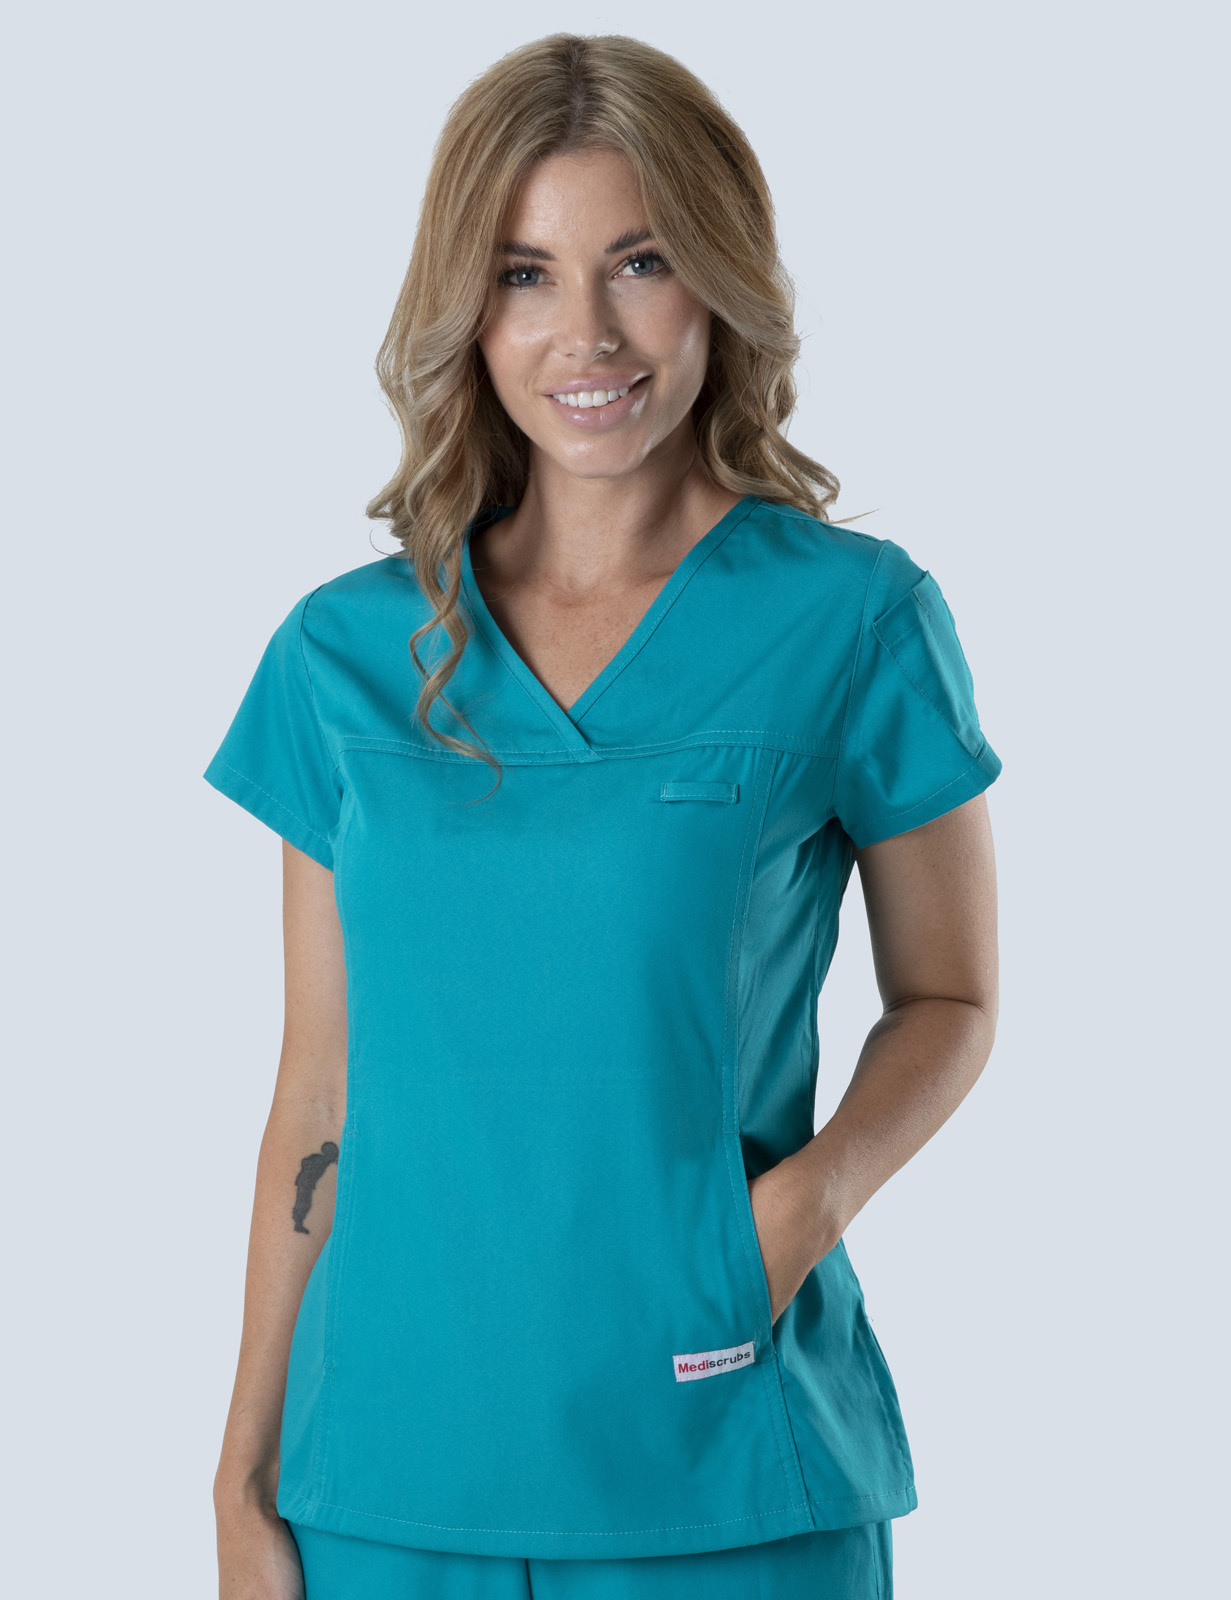 Gold Coast University Hospital - MAU RN (Women's Fit Solid Scrub Top and Cargo Pants in Teal incl Logos)